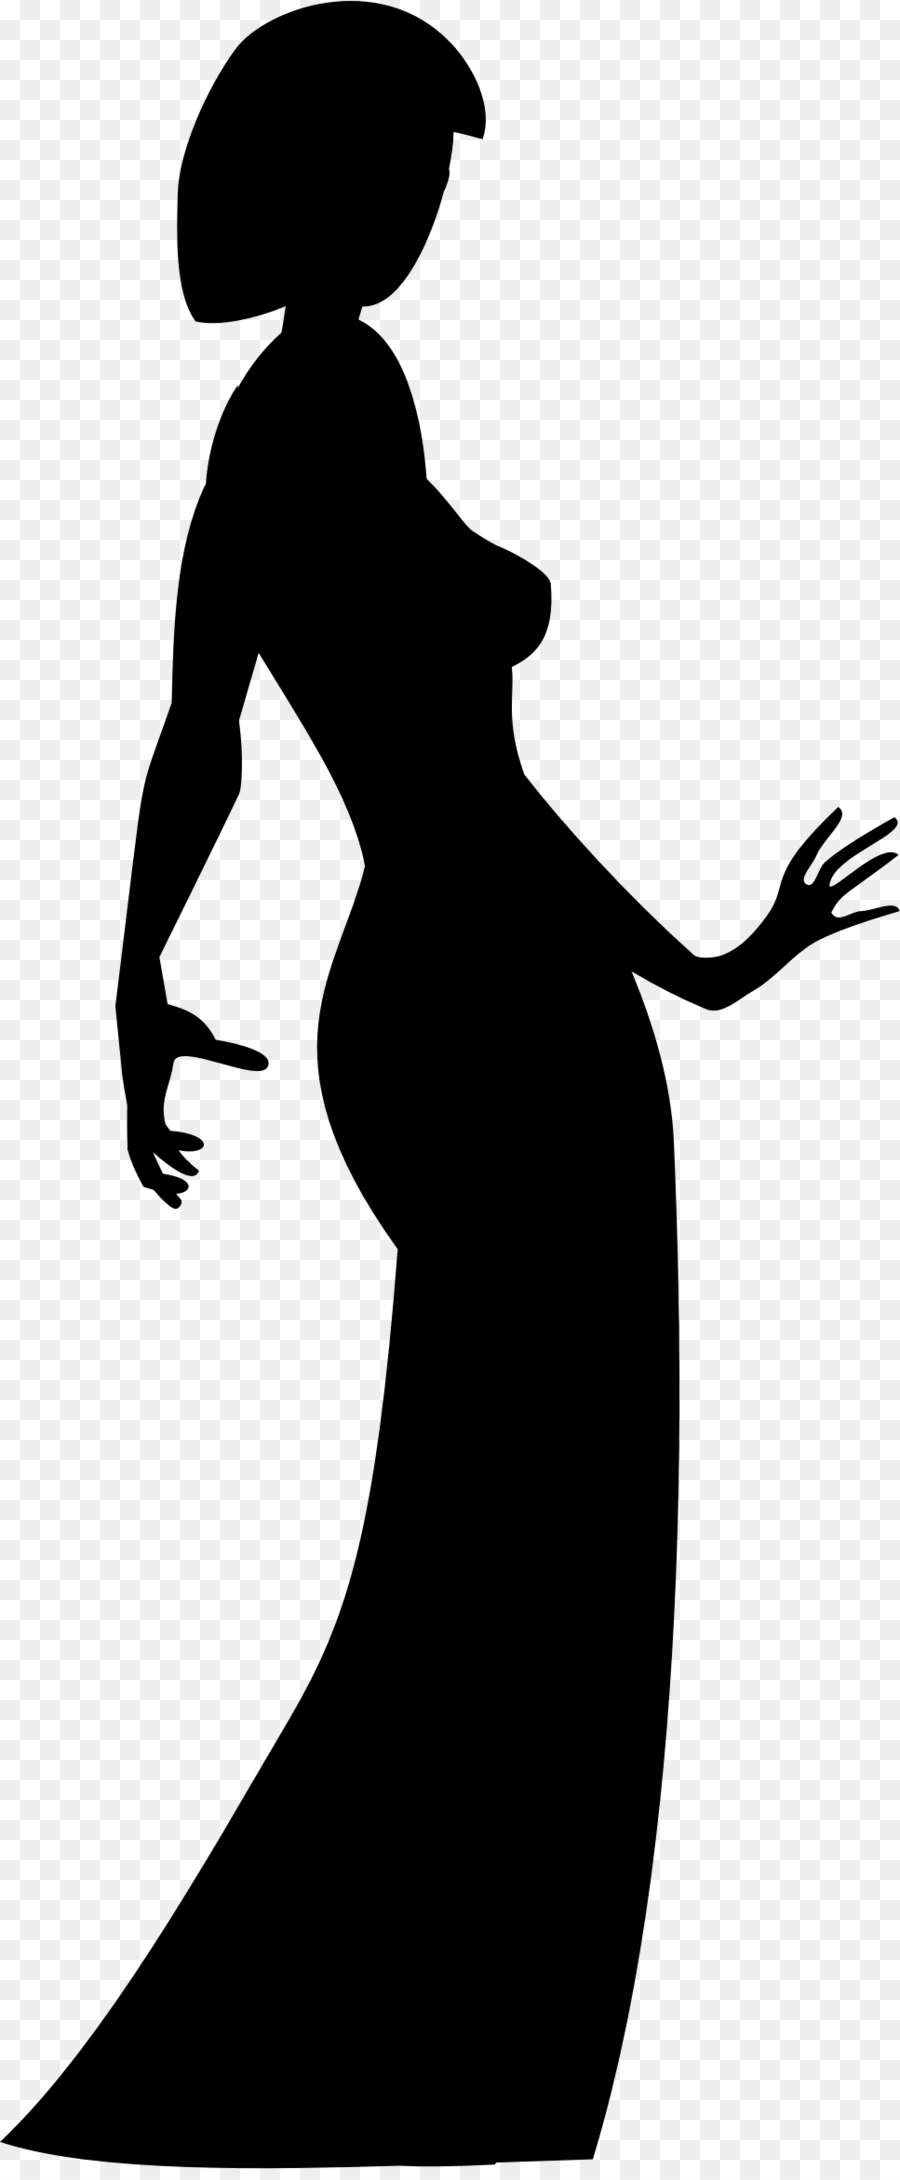 Woman Silhouette Dress Gown Clip art - Silhouette png download - 967*2331 - Free Transparent Woman png Download.